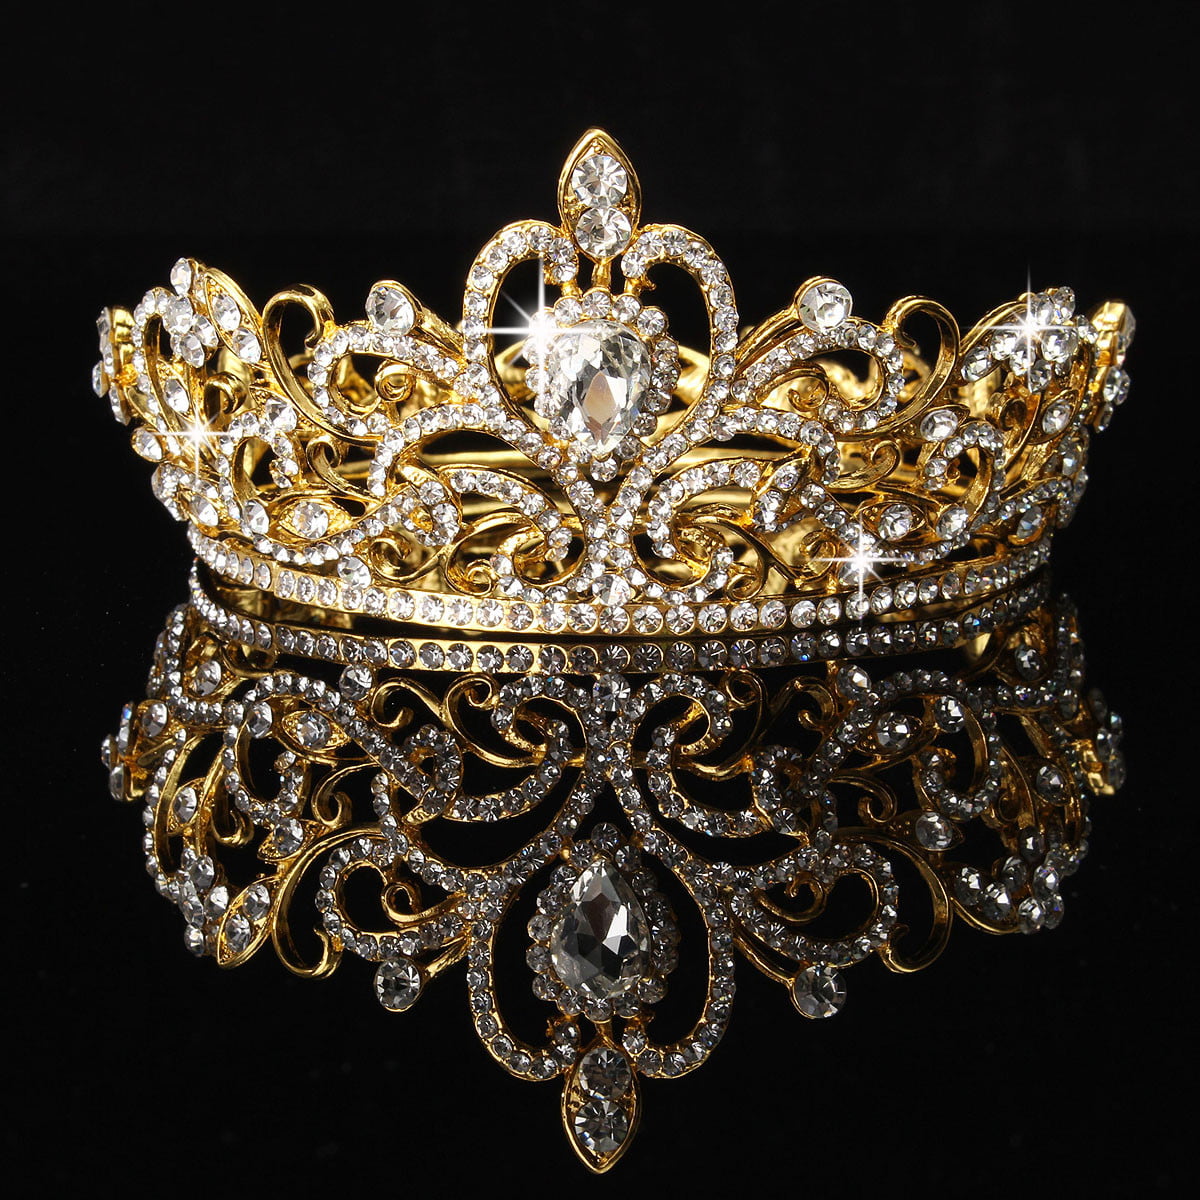 8cm High Antique Brass Crystal Wedding Bridal Party Pageant Prom Tiara Crown 